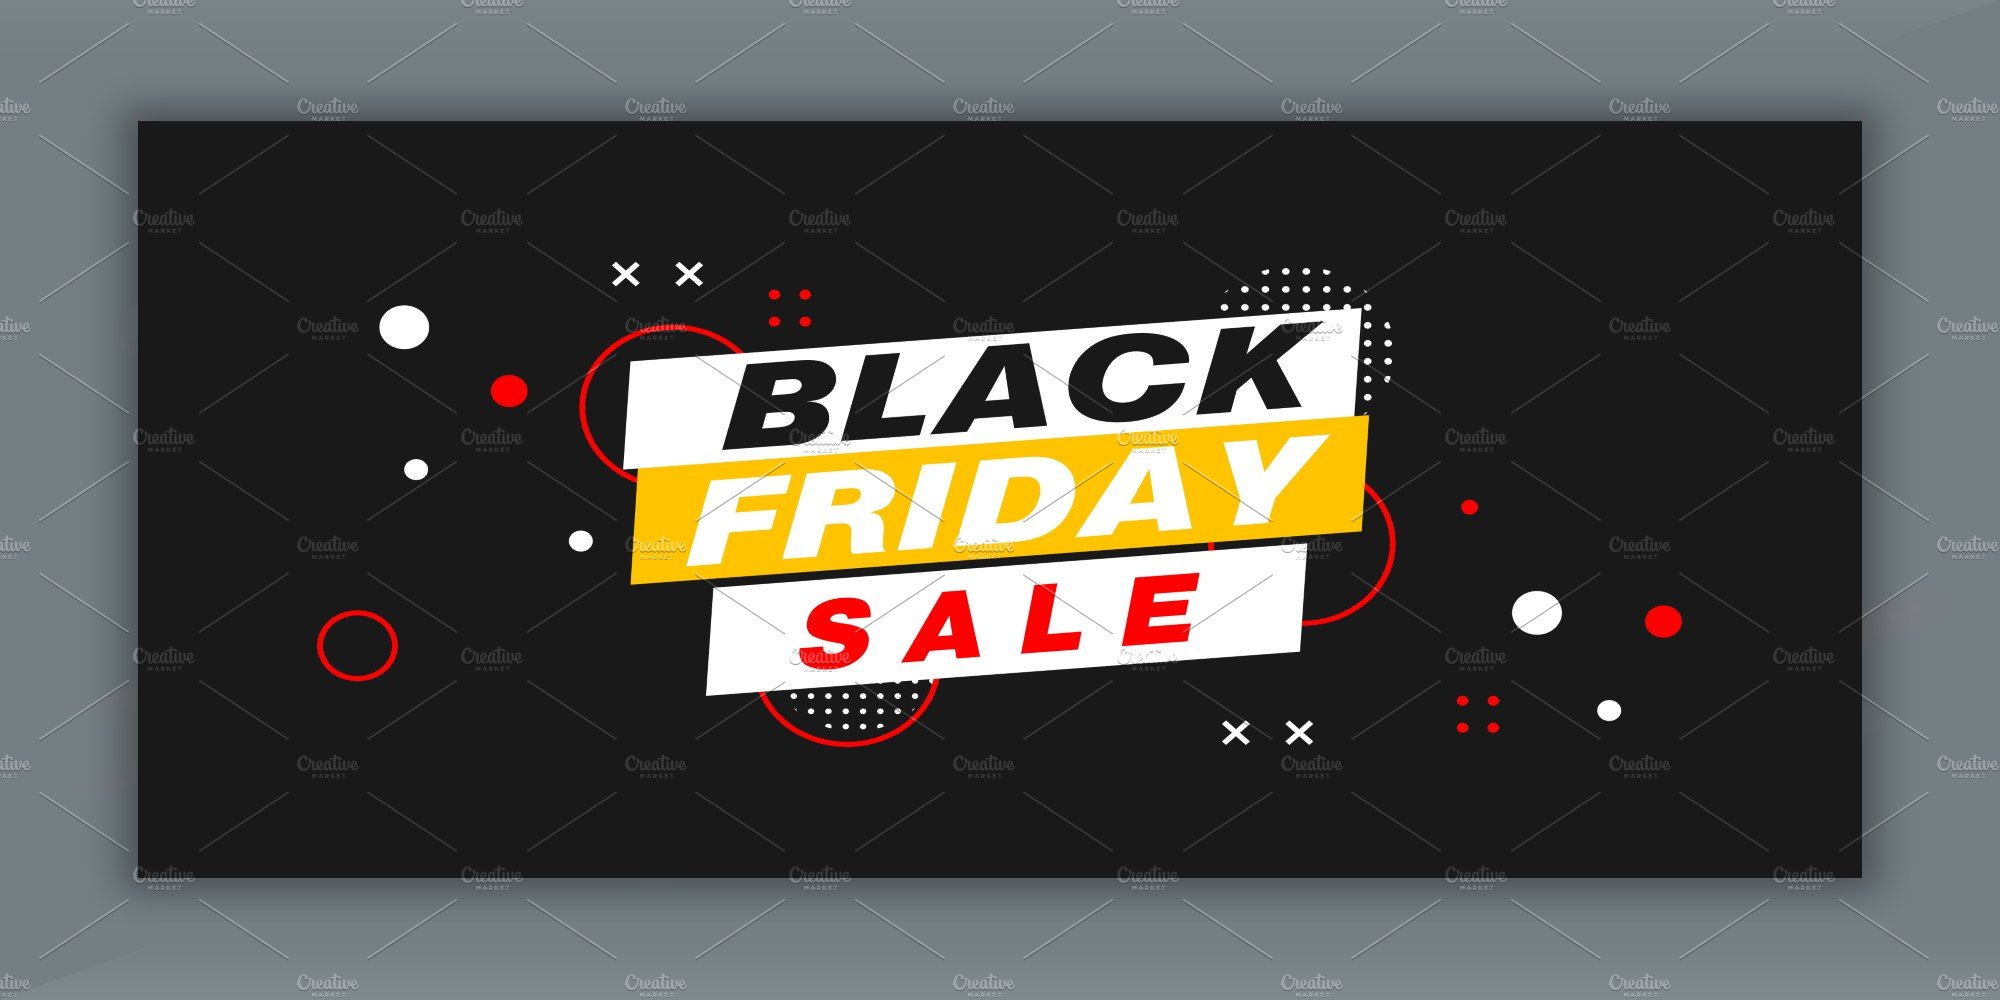 Dark black Friday banner with bright elements and vivid font.